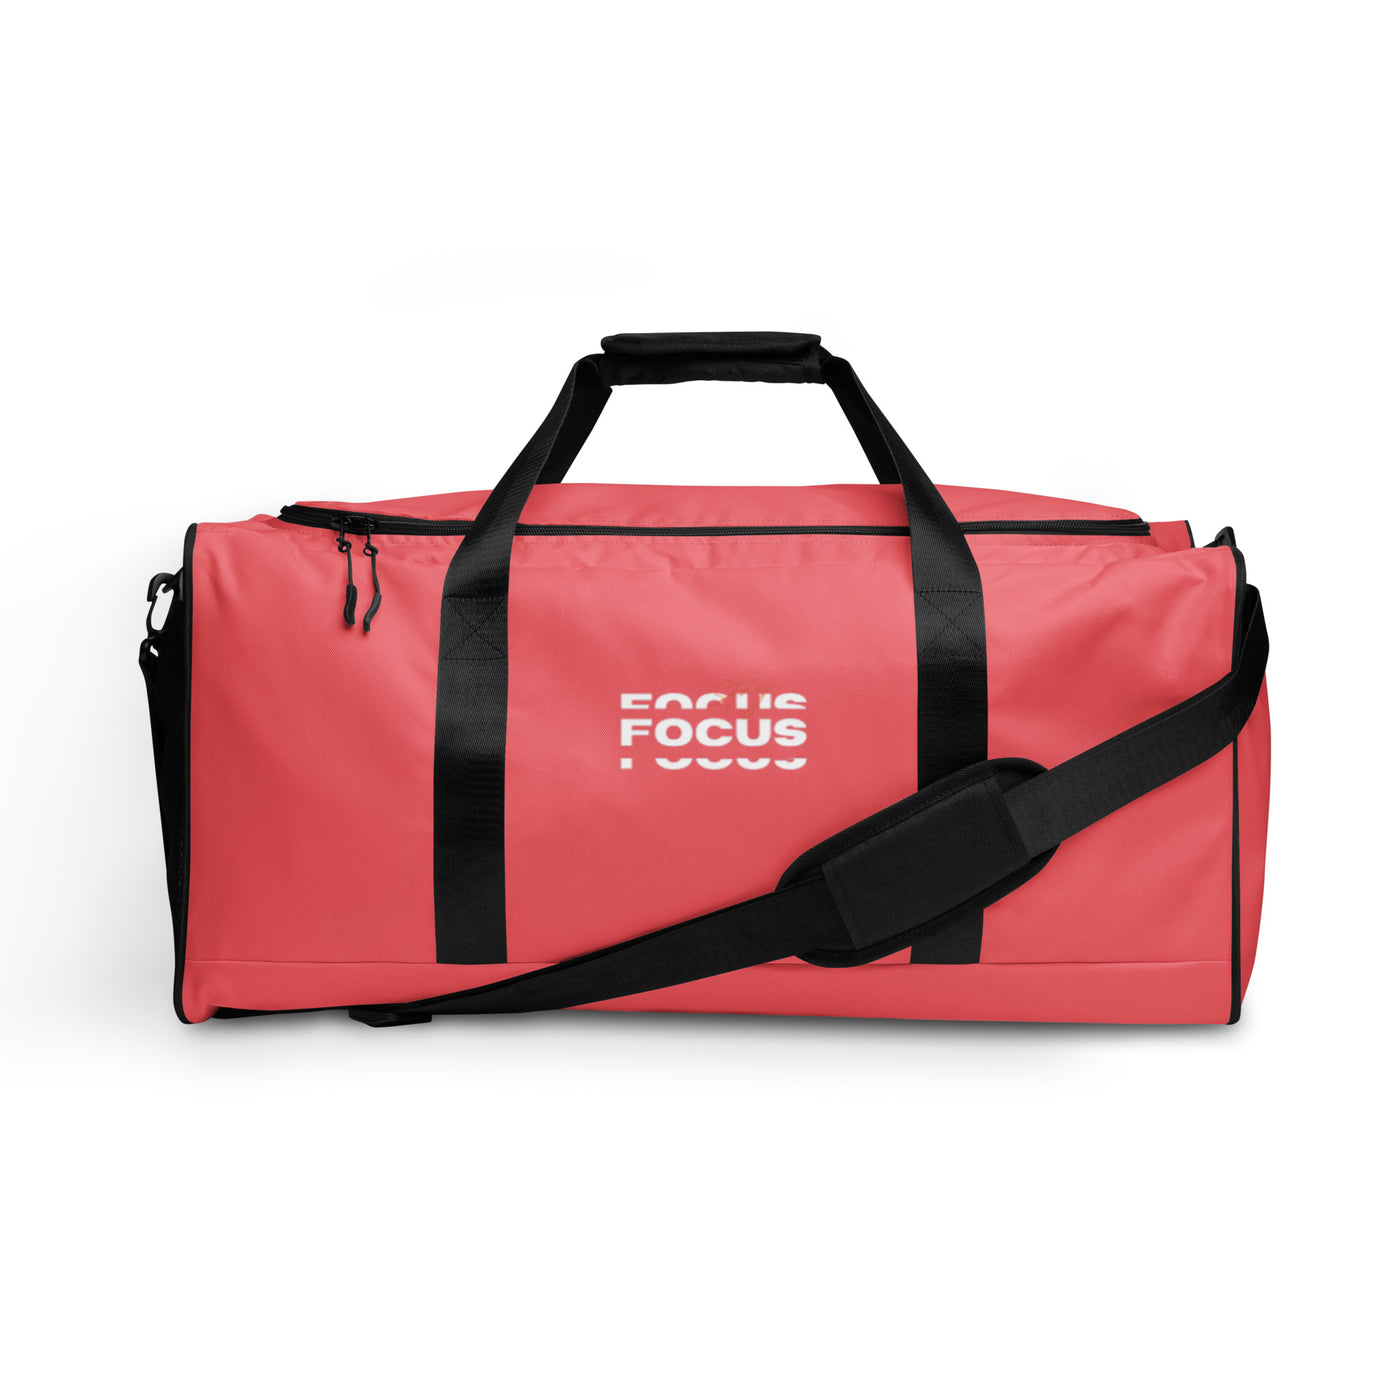 Froly Duffle Bag - Stay Focus